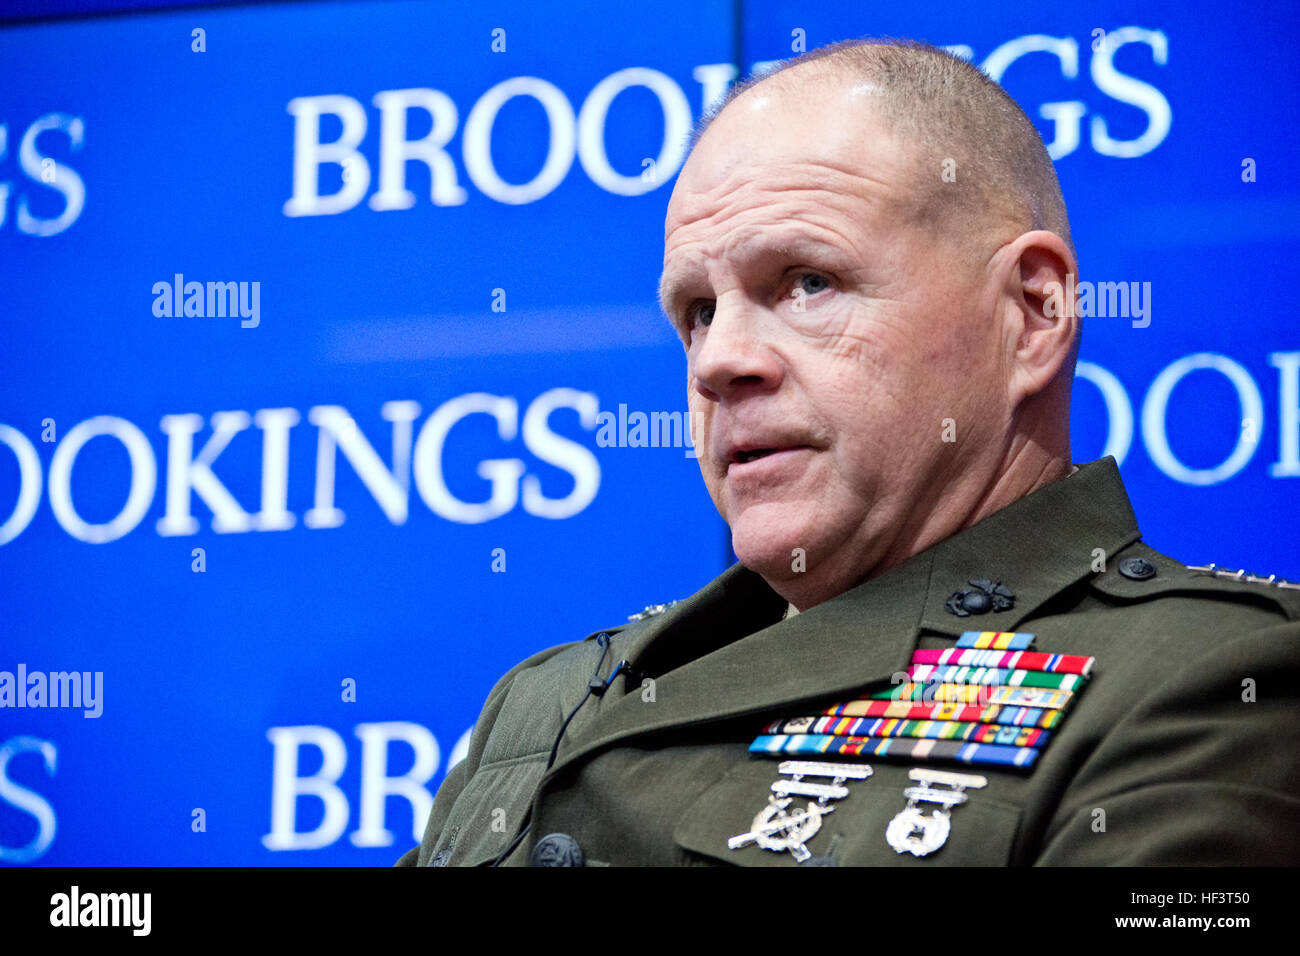 Commandant of the Marine Corps Gen. Robert B. Neller, speaks at an event with the Center for 21st Century Security and Intelligence at the Brookings Institution, Washington, D.C., Feb. 26, 2016. Neller, the Secretary of the Navy Ray Mabus, and Chief of Naval Operations Adm. John M. Richardson discussed the future maritime concepts, strategies and technologies with Michael O'Hanlon as the moderator. (U.S. Marine Corps photo by Staff Sgt. Gabriela Garcia/Released) CMC at Brookings 160226-M-SA716-016 Stock Photo